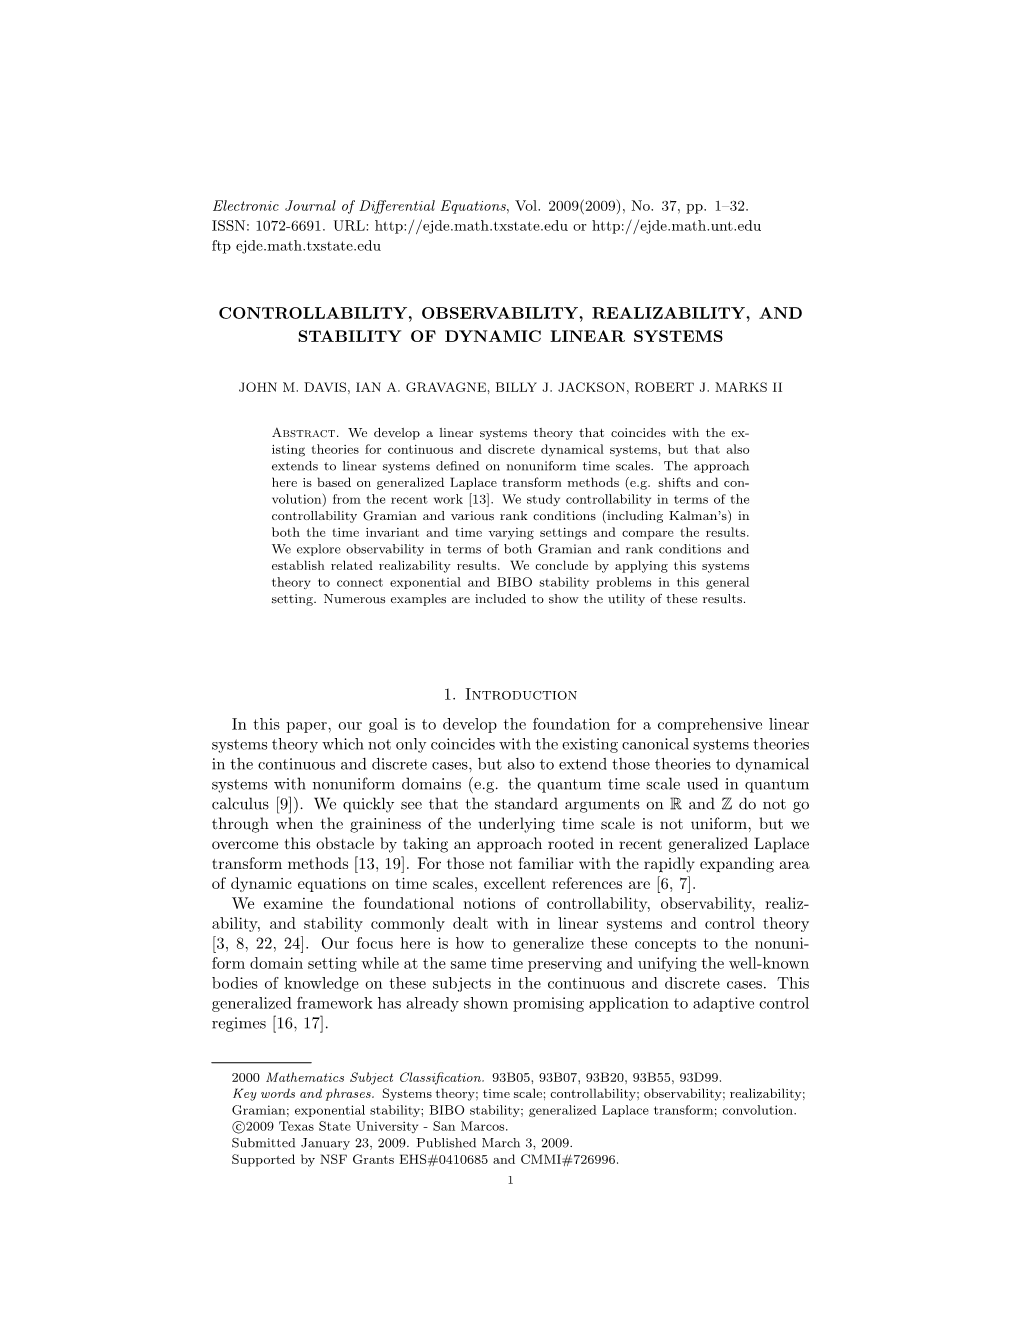 Controllability, Observability, Realizability, and Stability of Dynamic Linear Systems